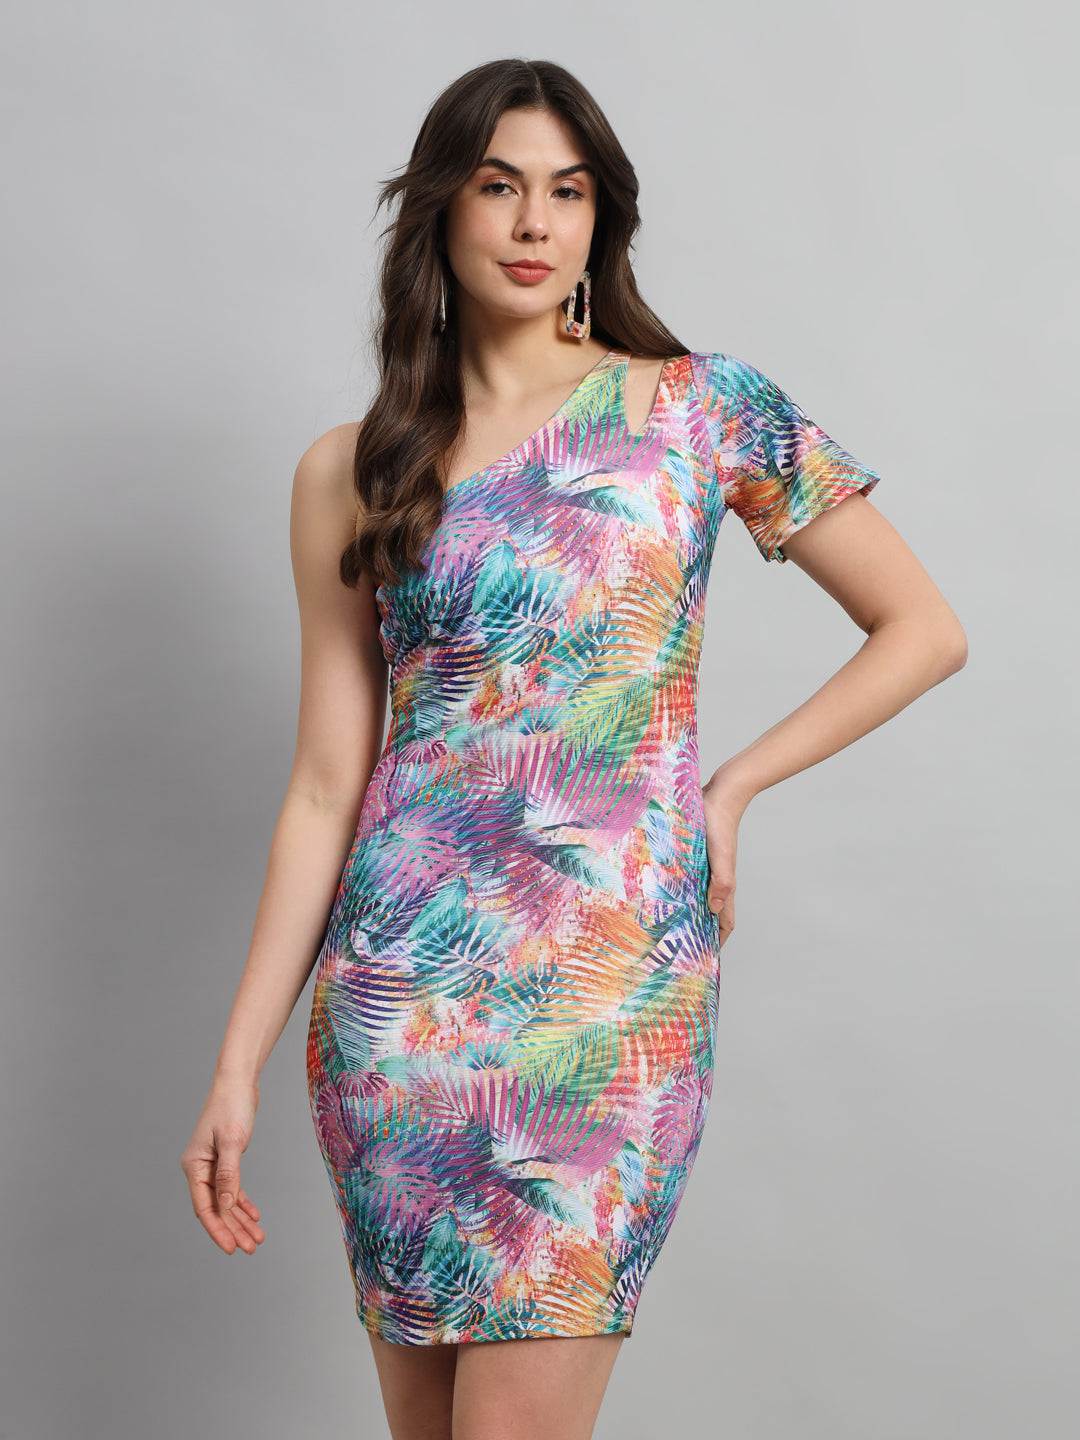 SCORPIUS Floral Printed One Shoulder Bodycon Dress